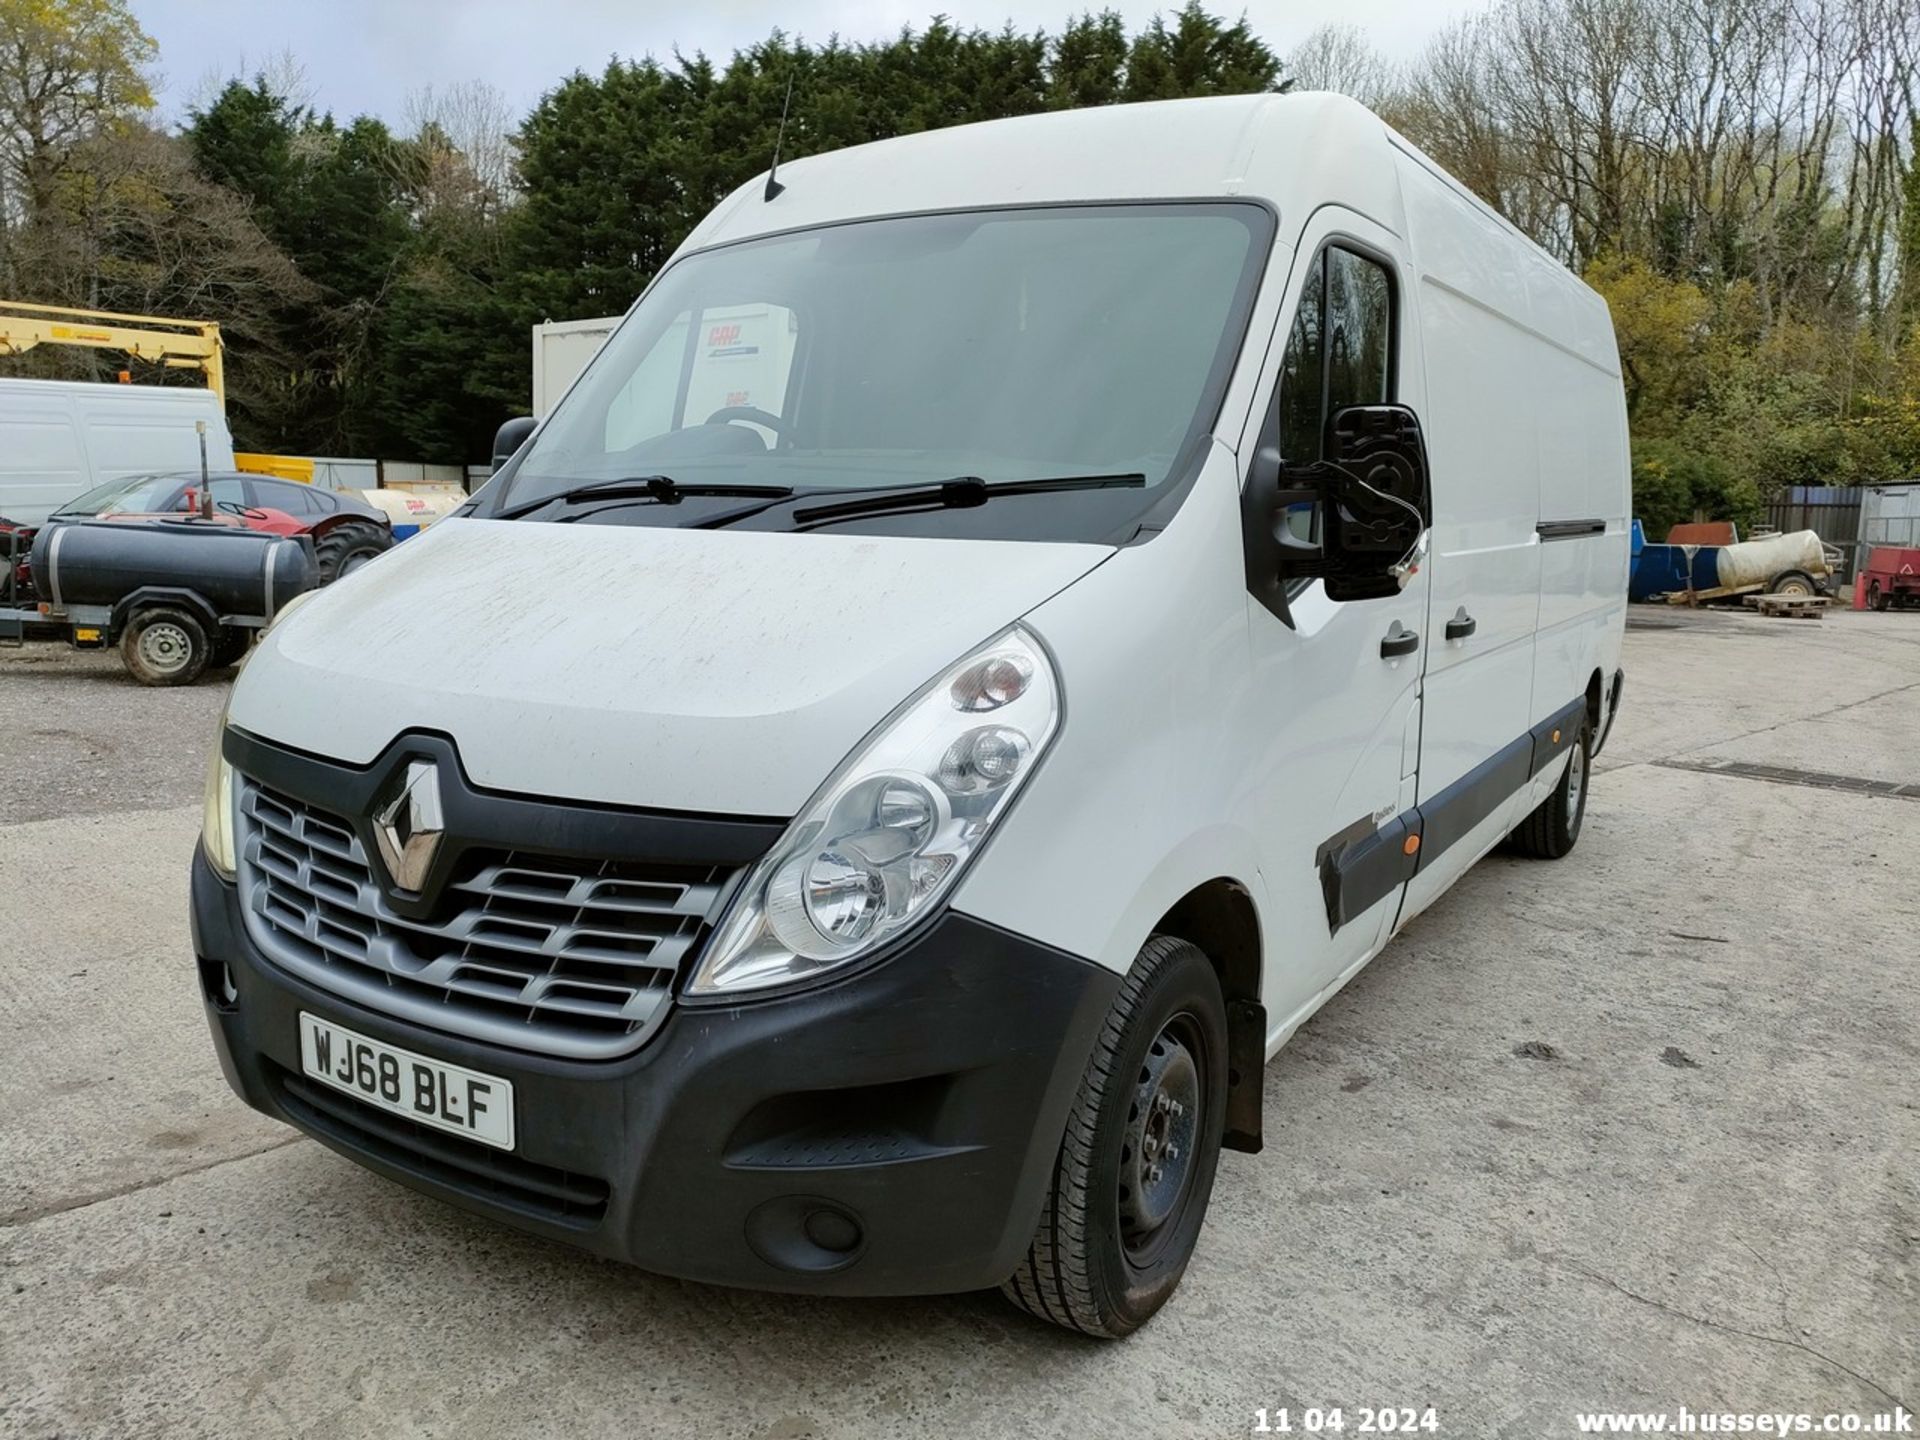 18/68 RENAULT MASTER LM35 BUSINESS DCI - 2298cc 5dr Van (White) - Image 11 of 68